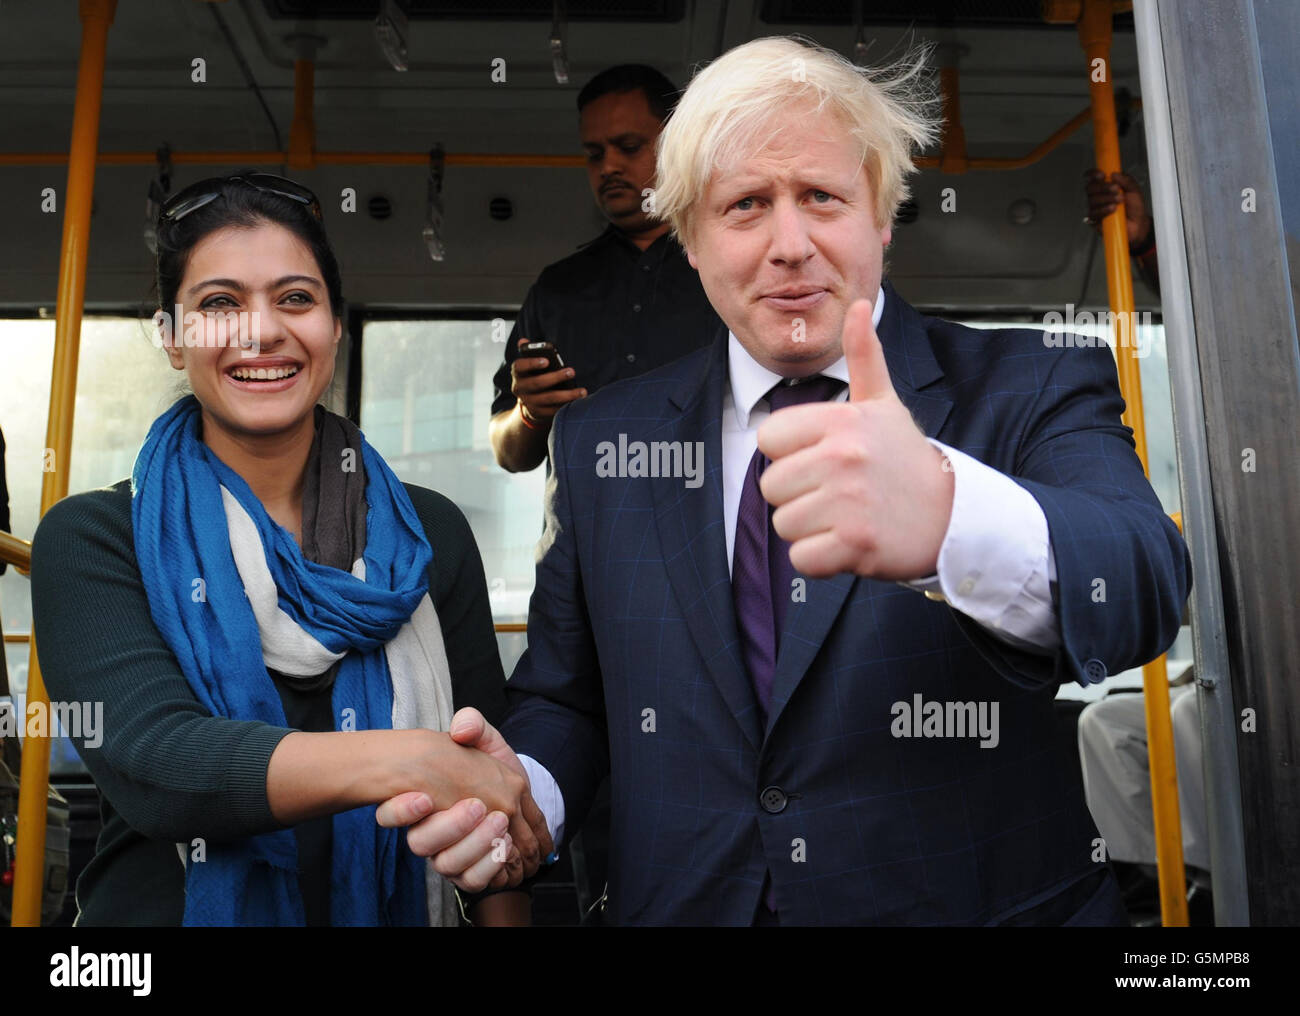 Mayor of London Boris Johnson bumps into Bollywood actress Kajol as he arrives in Mumbai today. The famous Indian actress happened to be on the same flight as the Mayor who was travelling from Hyderabad to Mumbai as part of a week long tour of India where he is trying to persuade Indian businesses to invest in London. Stock Photo